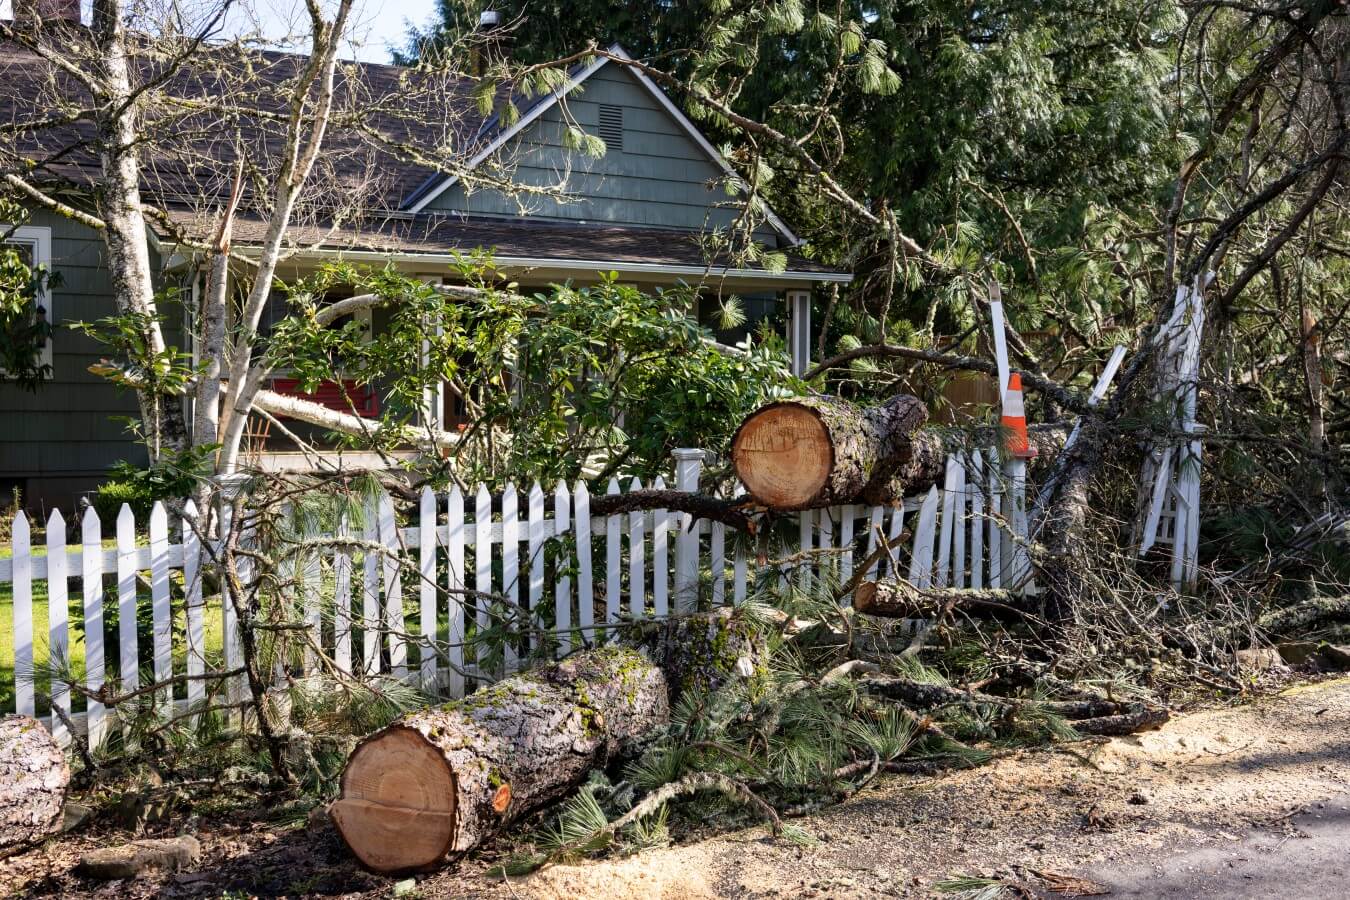 removing fallen trees by cutting them into sections in the front of a home